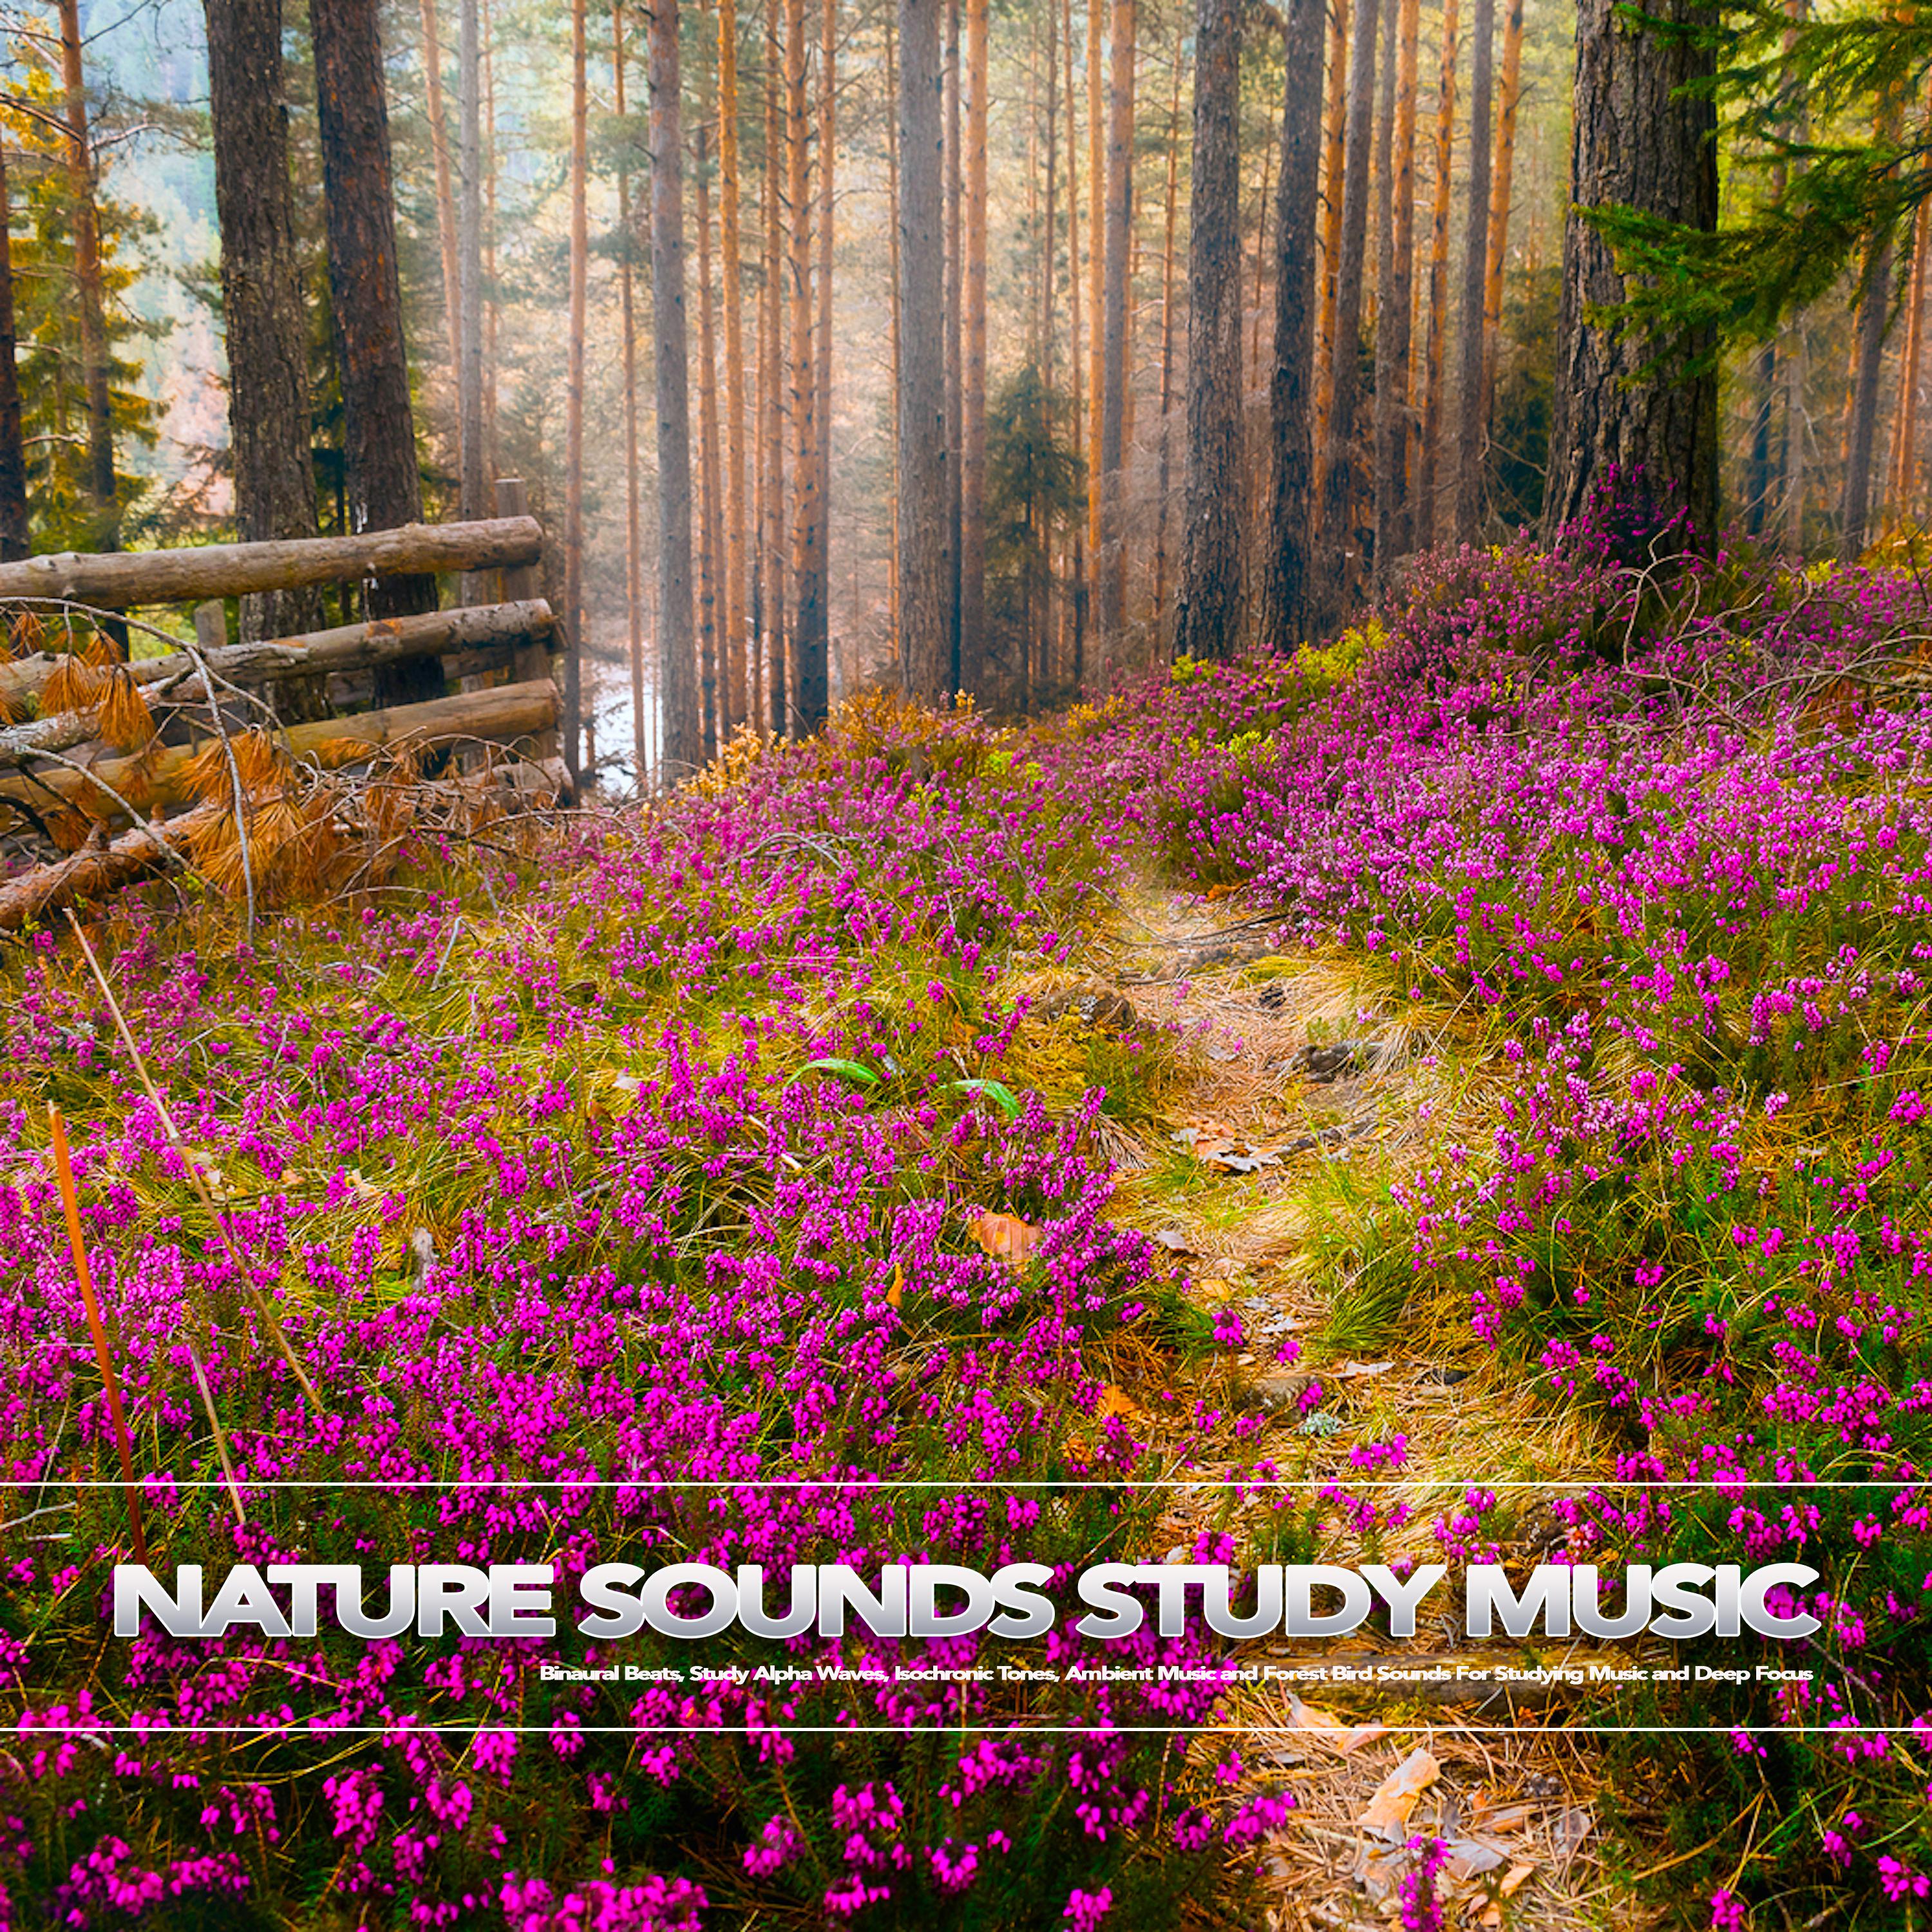 Sounds of the Forest Study Music